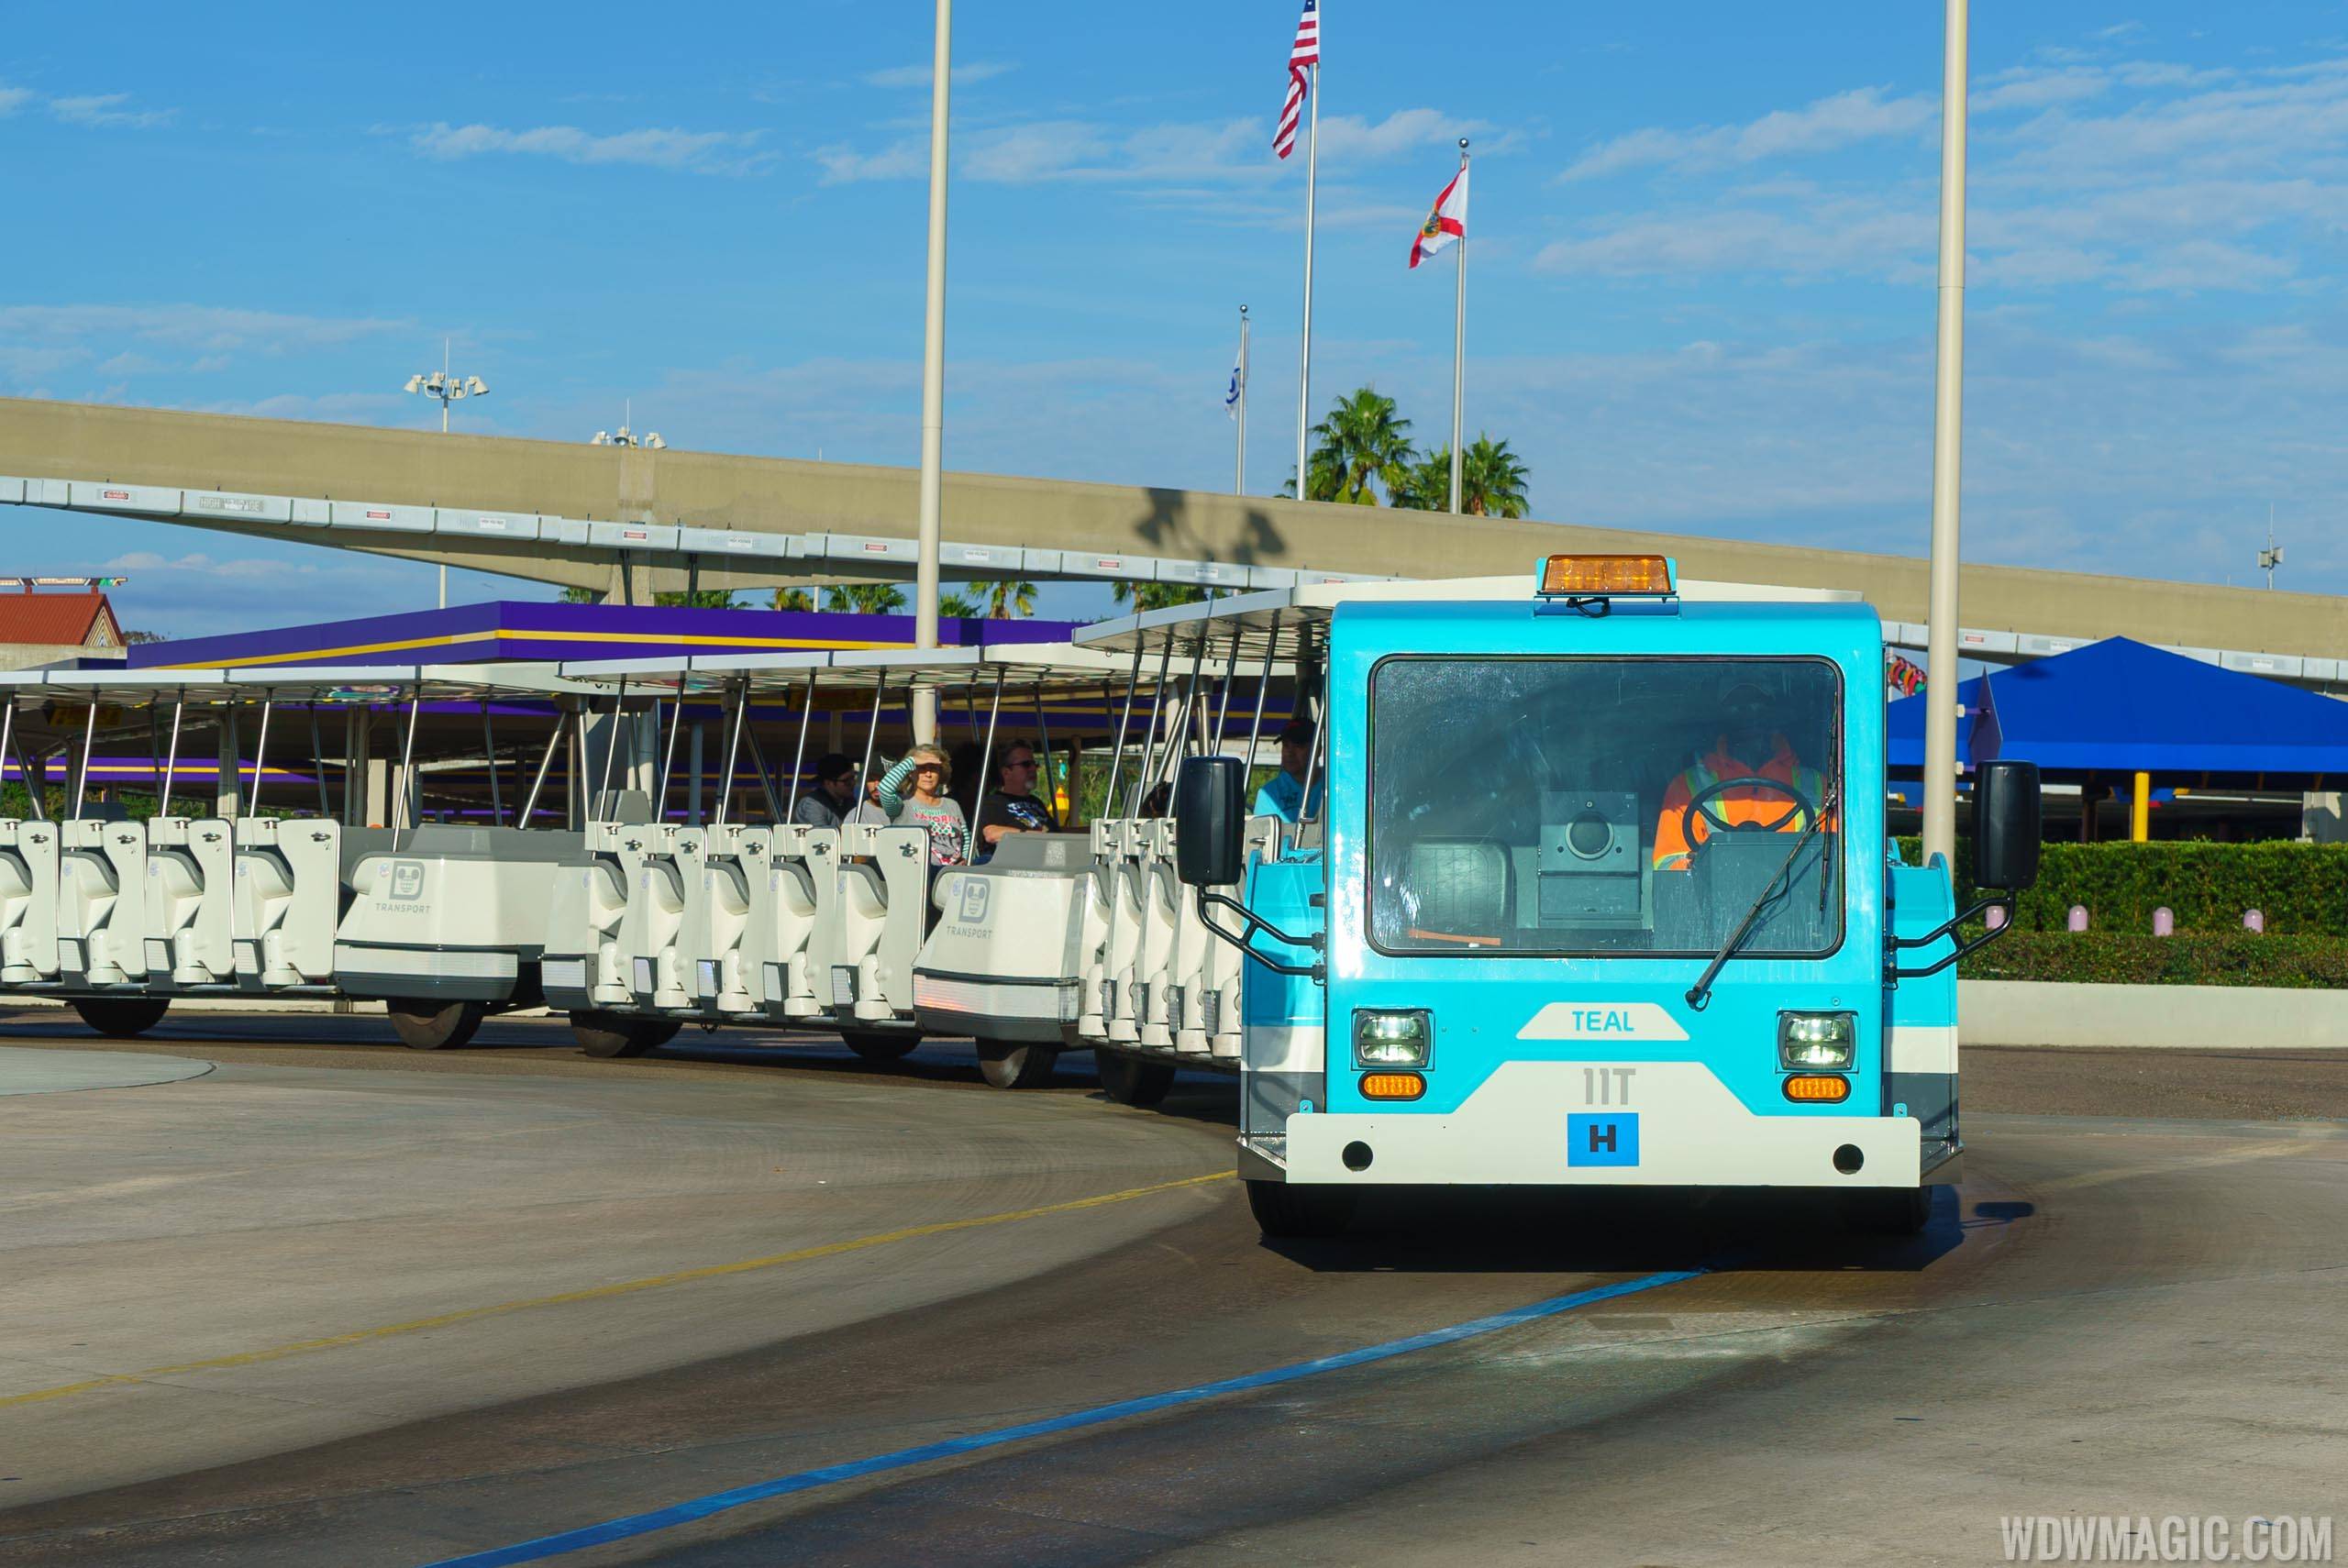 Parking Lot trams are already back in service at Magic Kingdom